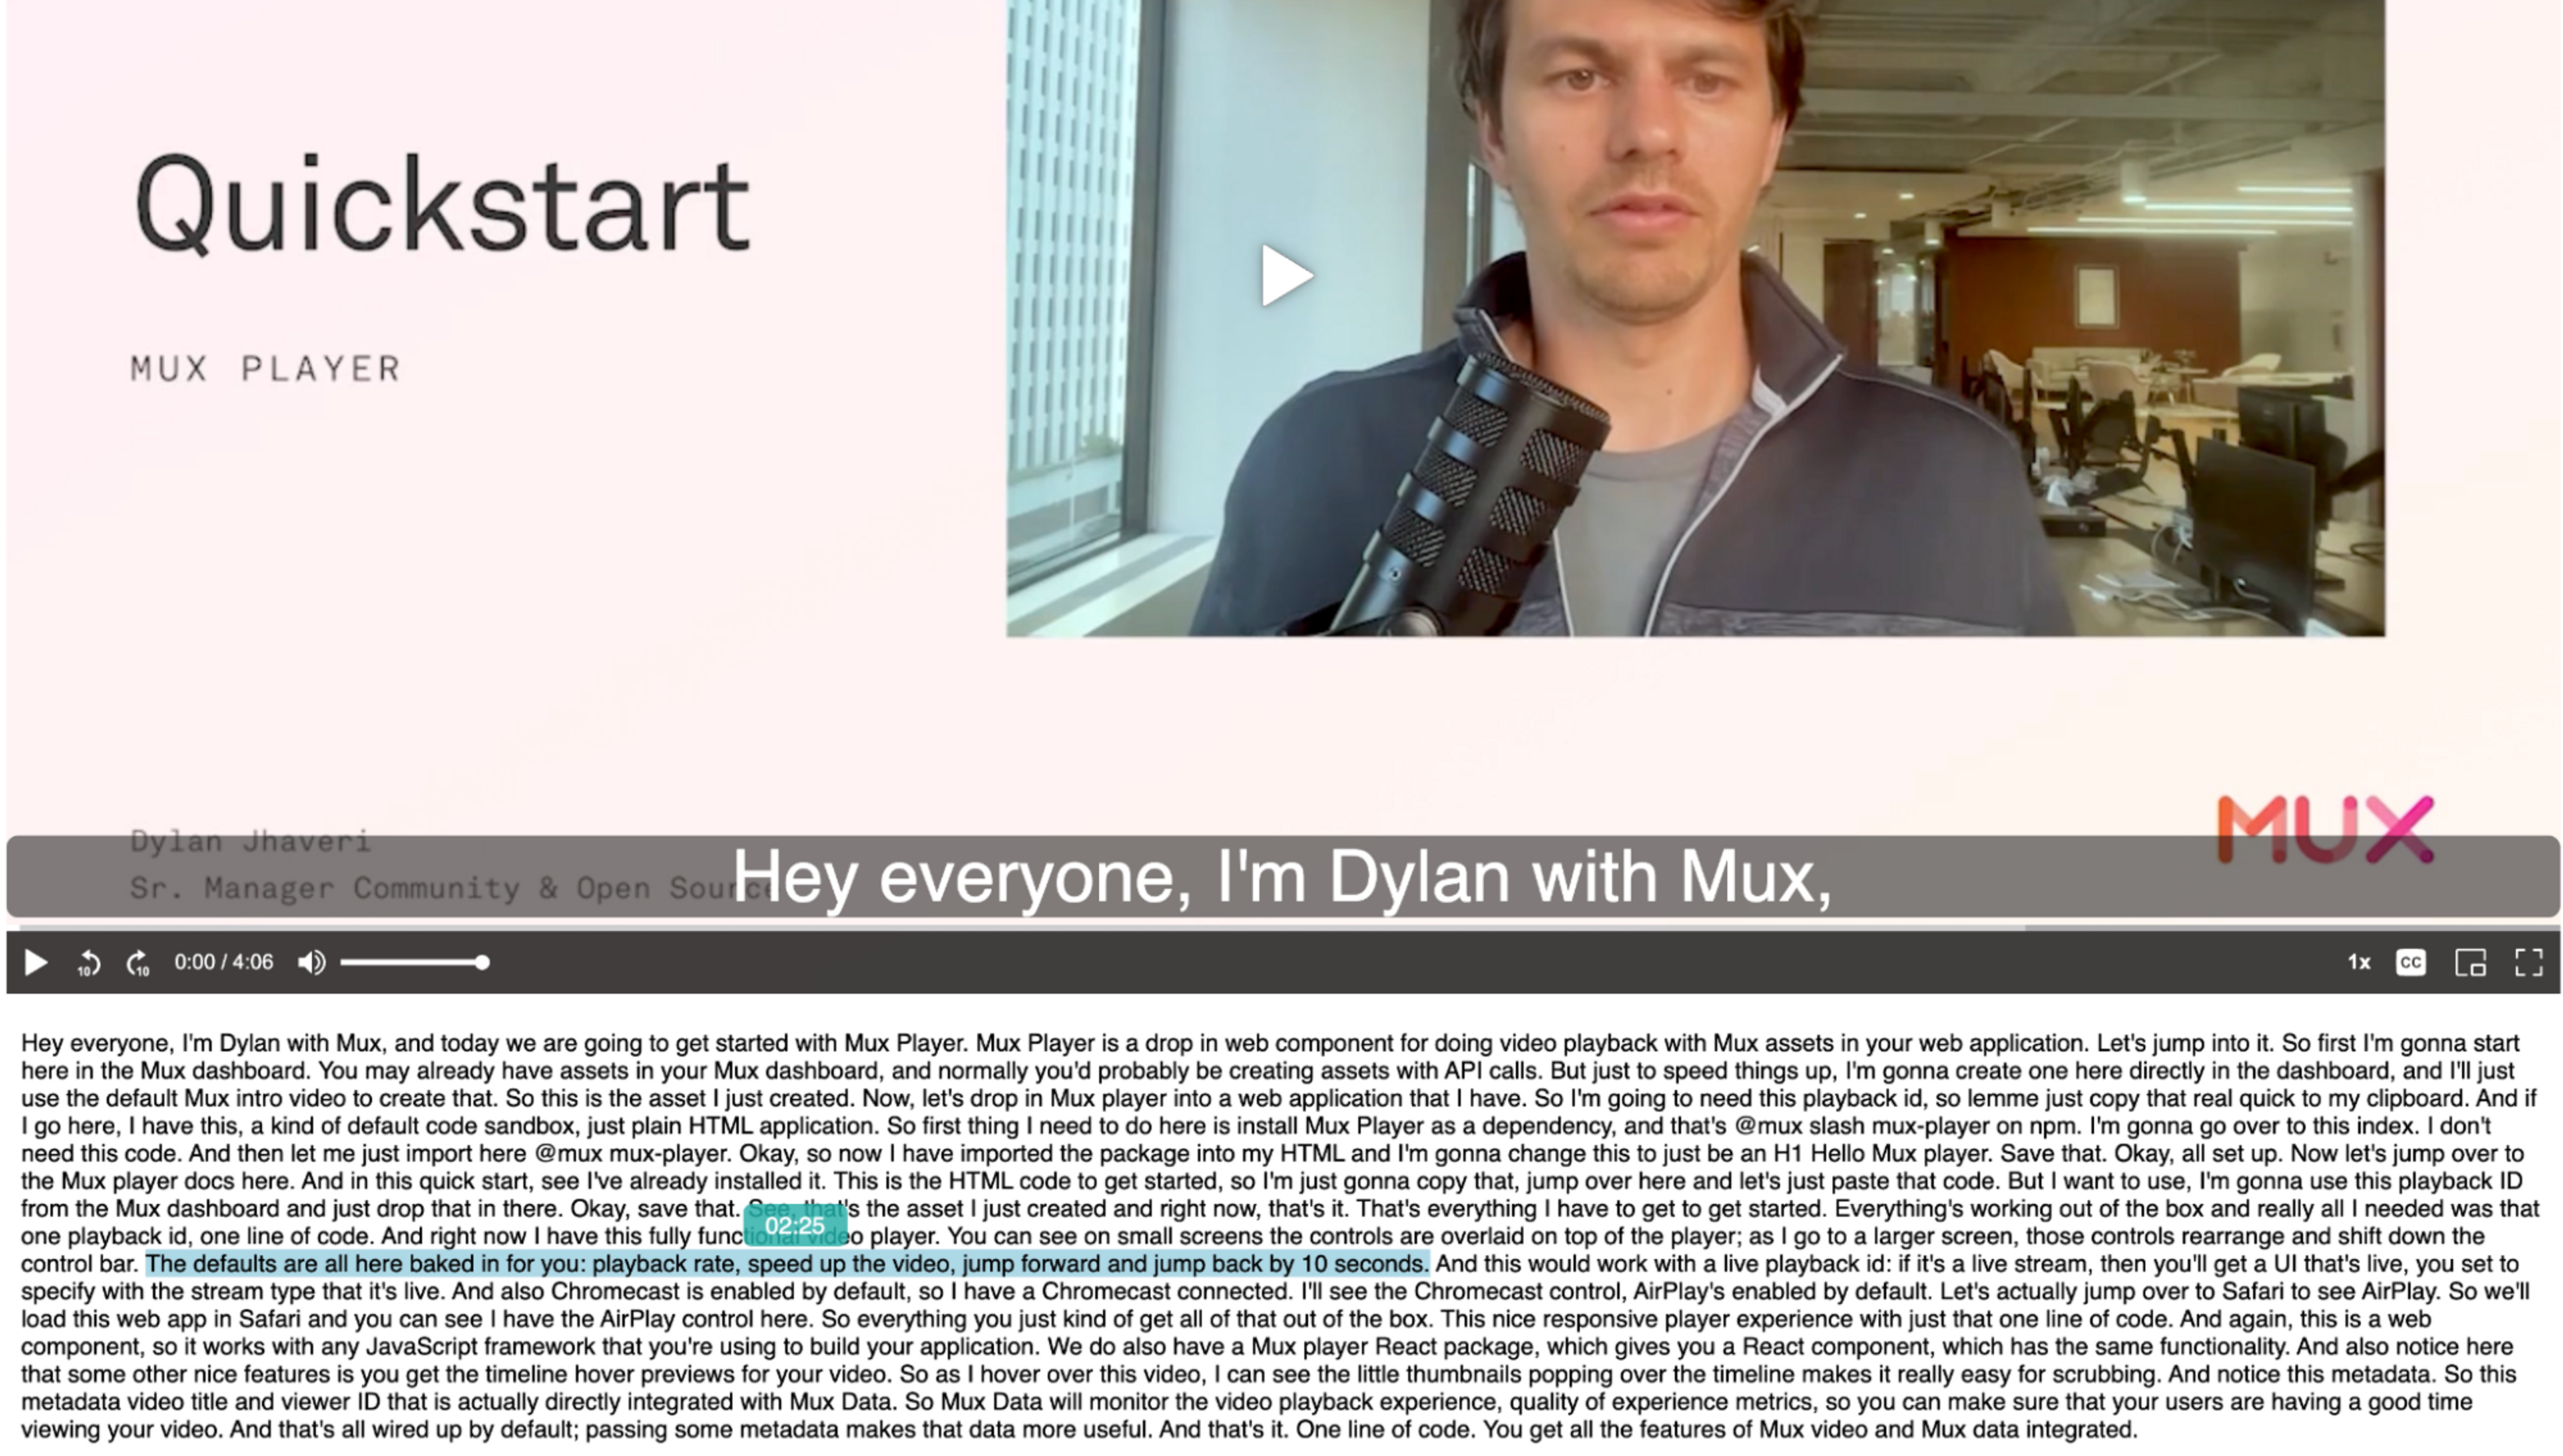 A screenshot of the updated app showing a video player and a transcript underneath it.